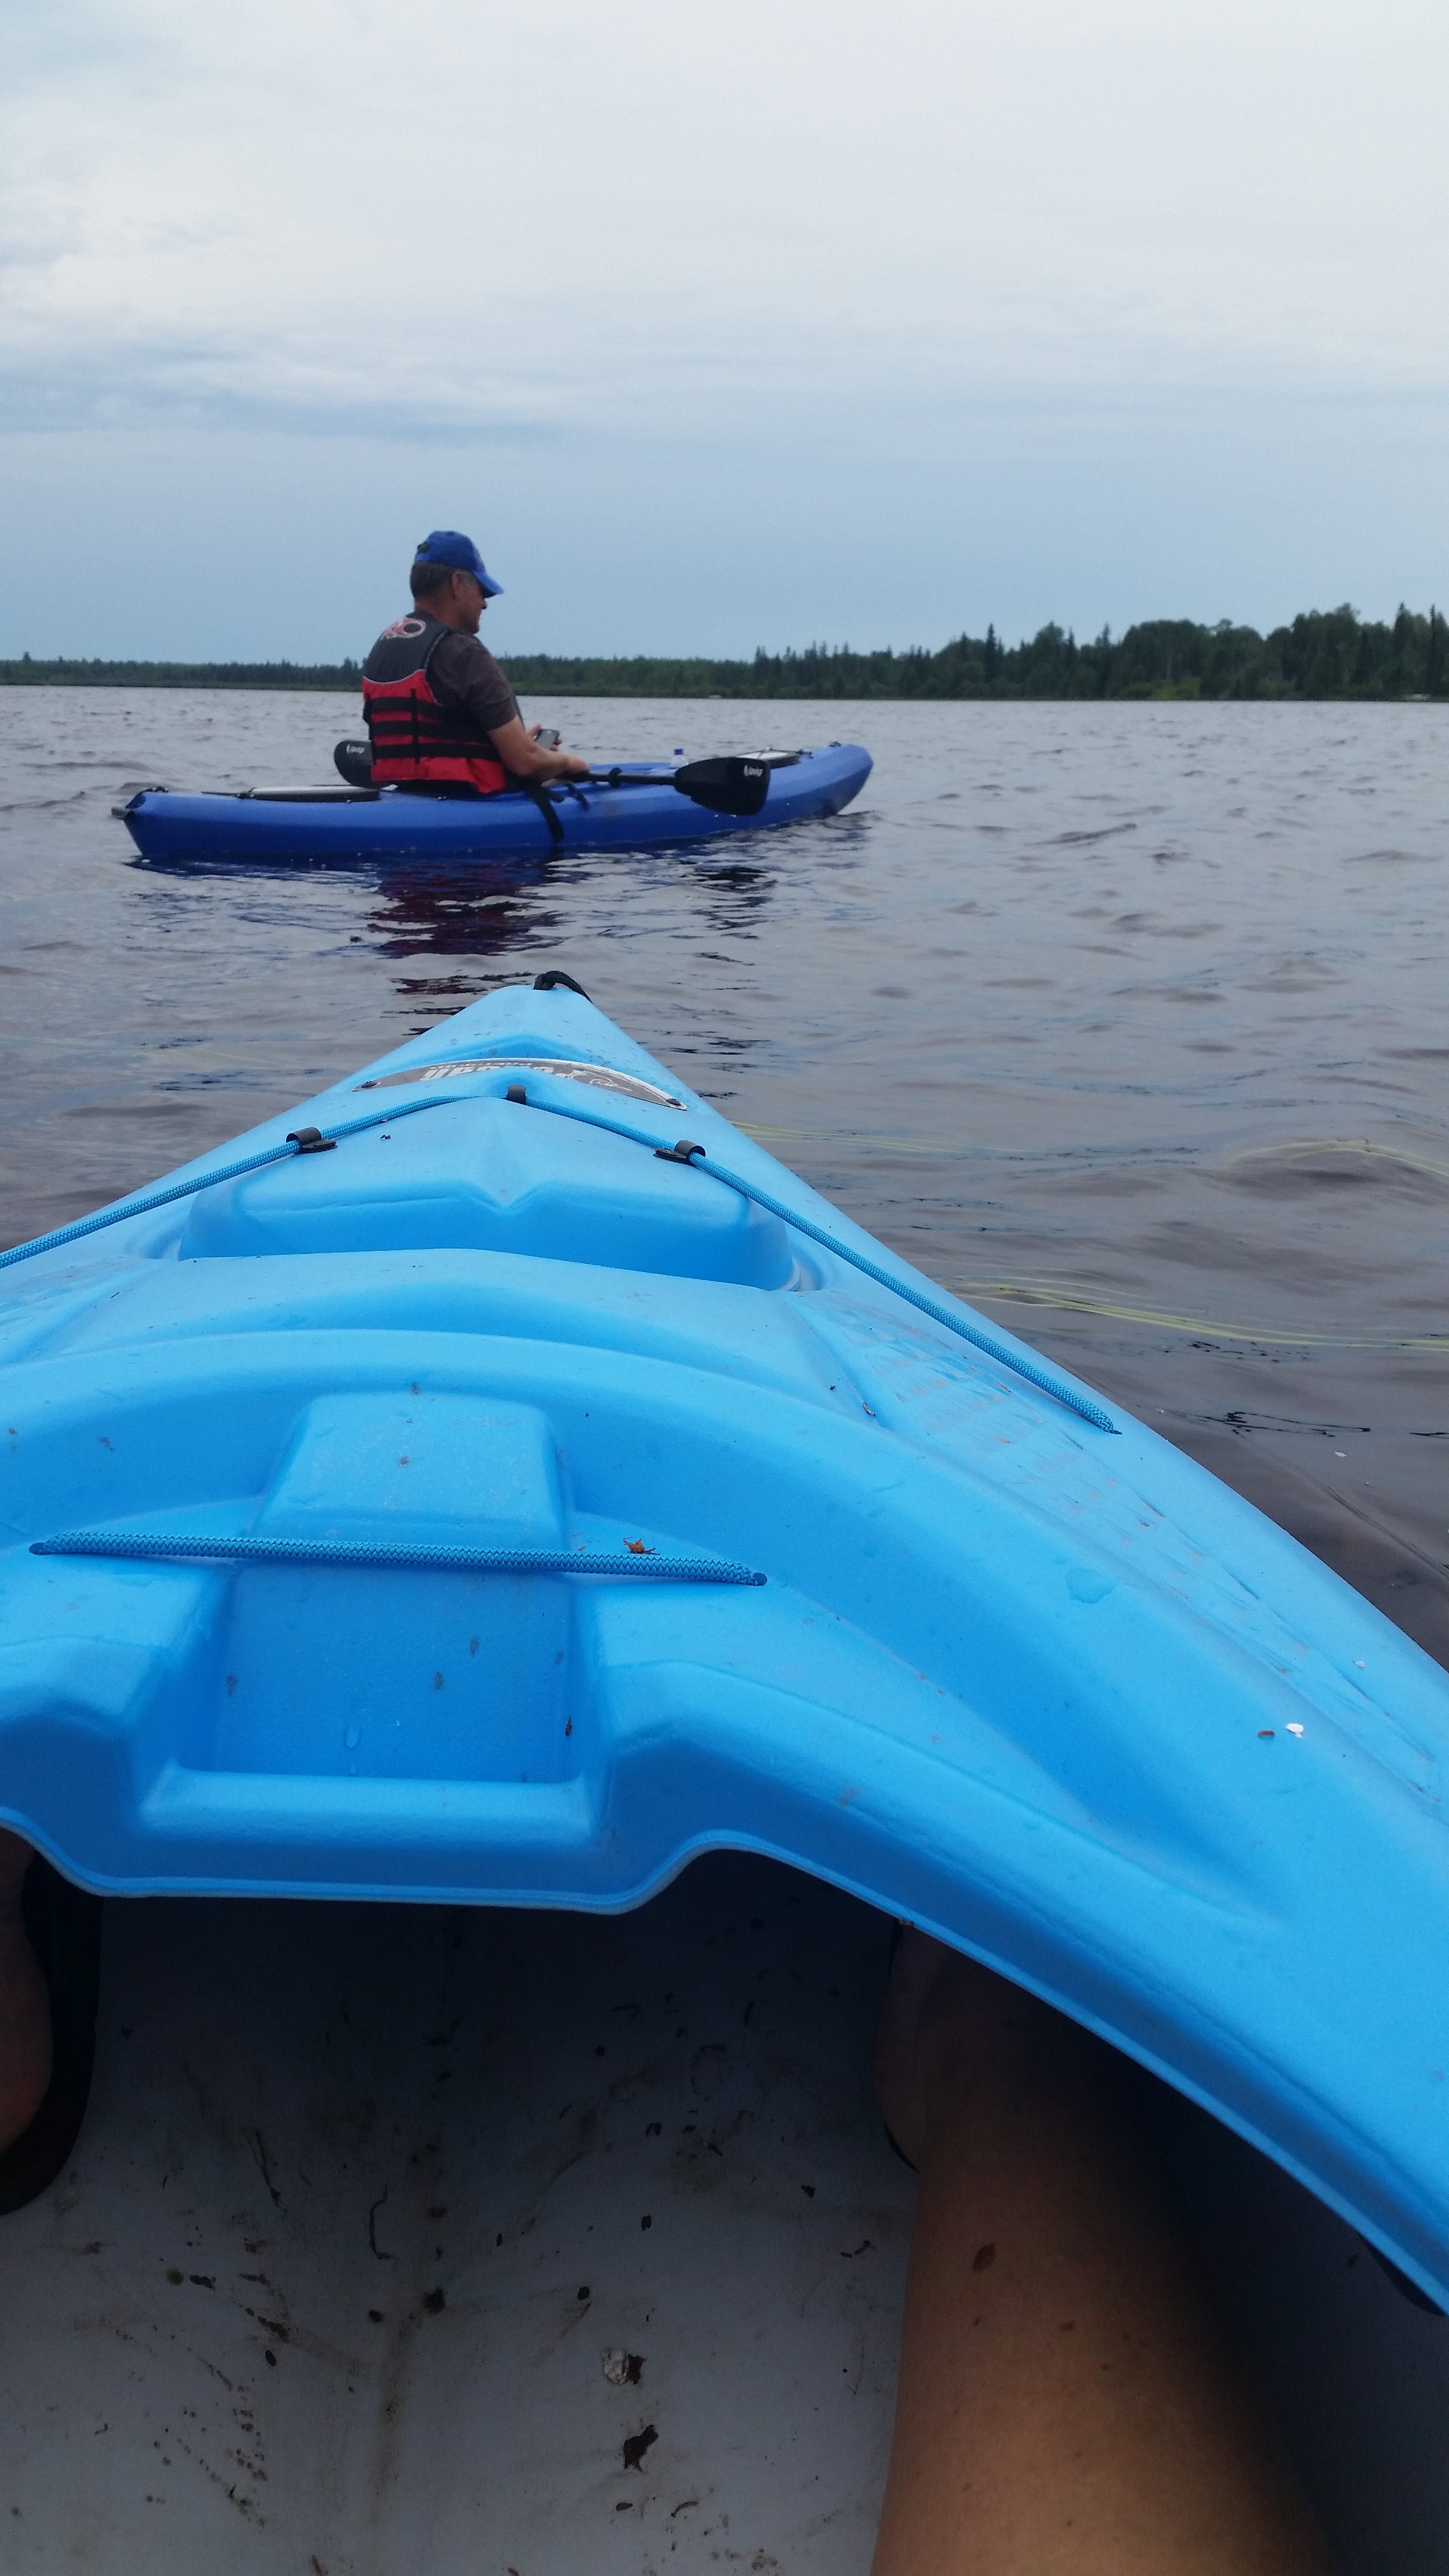 Kayaking the calm waters, we checked out the shorelines and even paddled under a fallen tree.